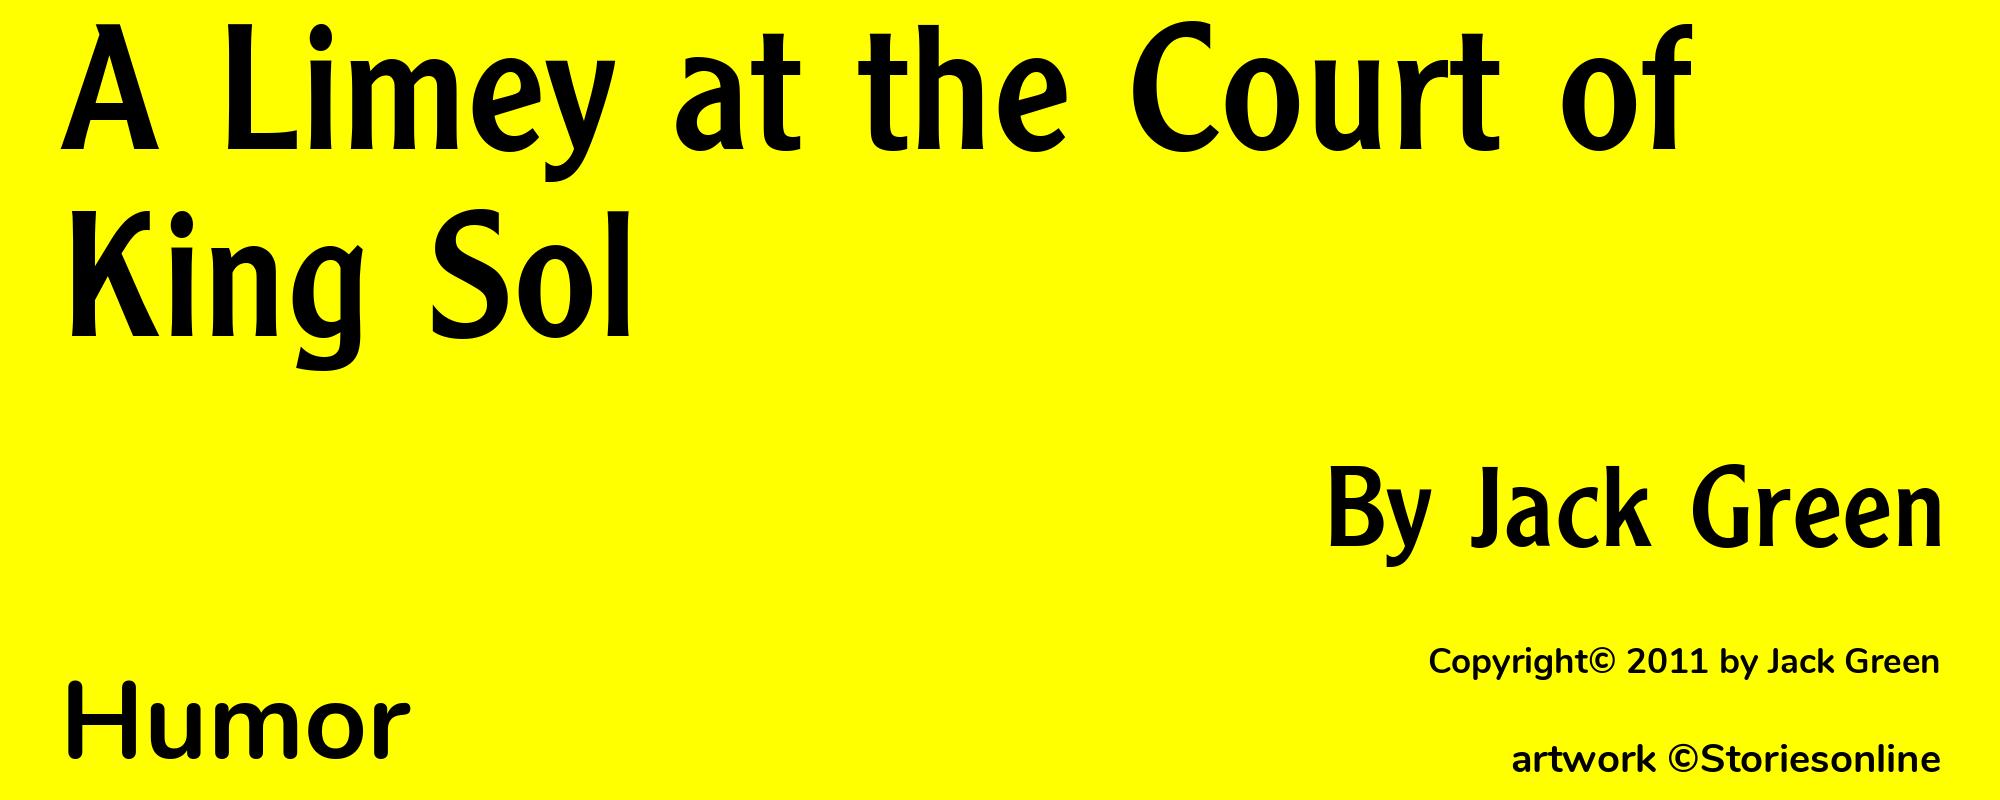 A Limey at the Court of King Sol - Cover